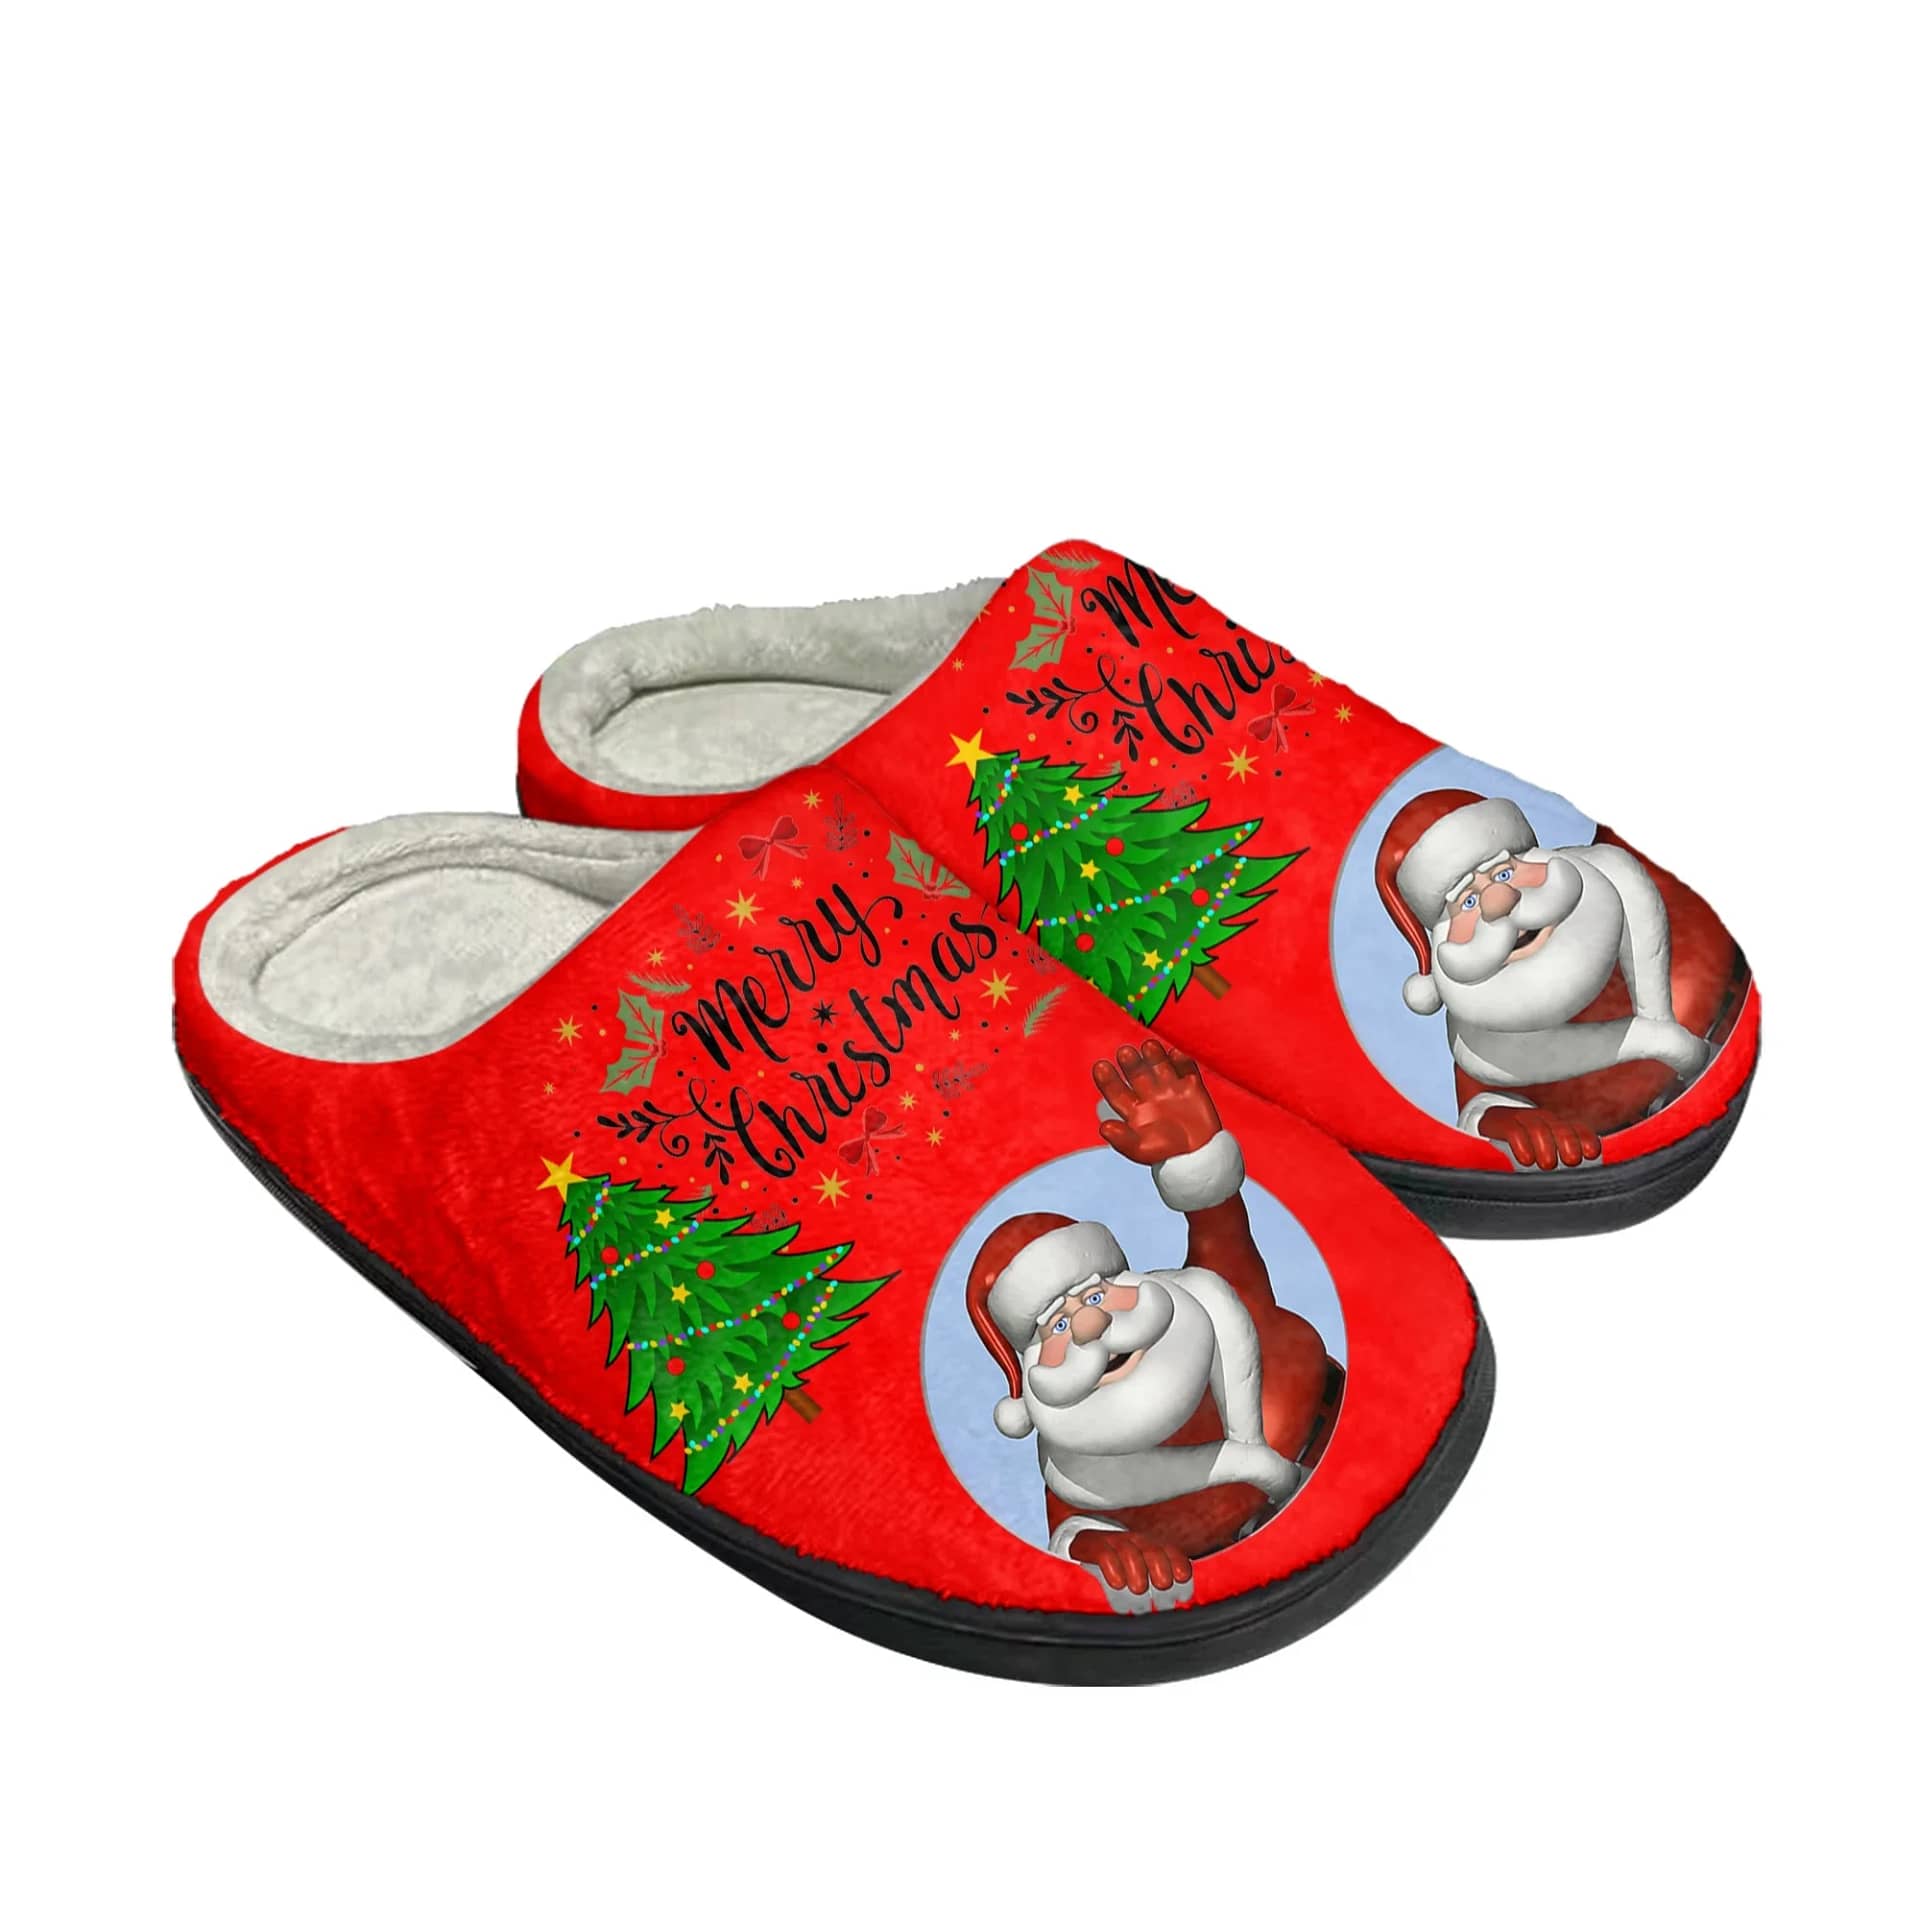 Merry Christmas Santa Claus Red Shoes Slippers